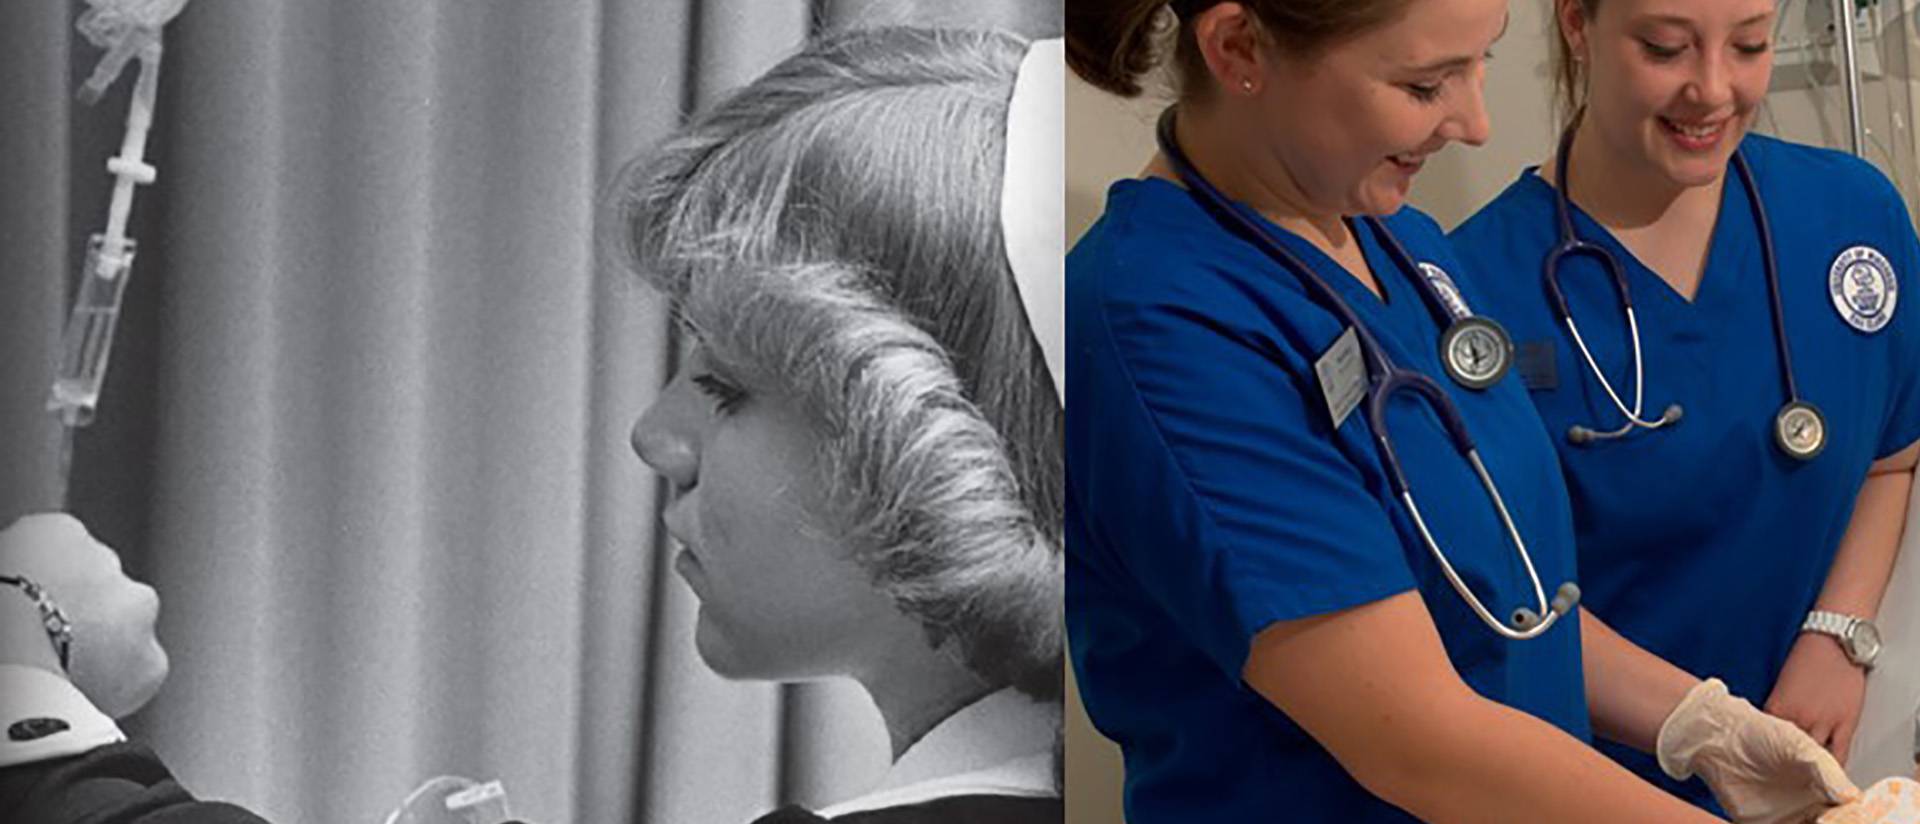 Nursing students then and now